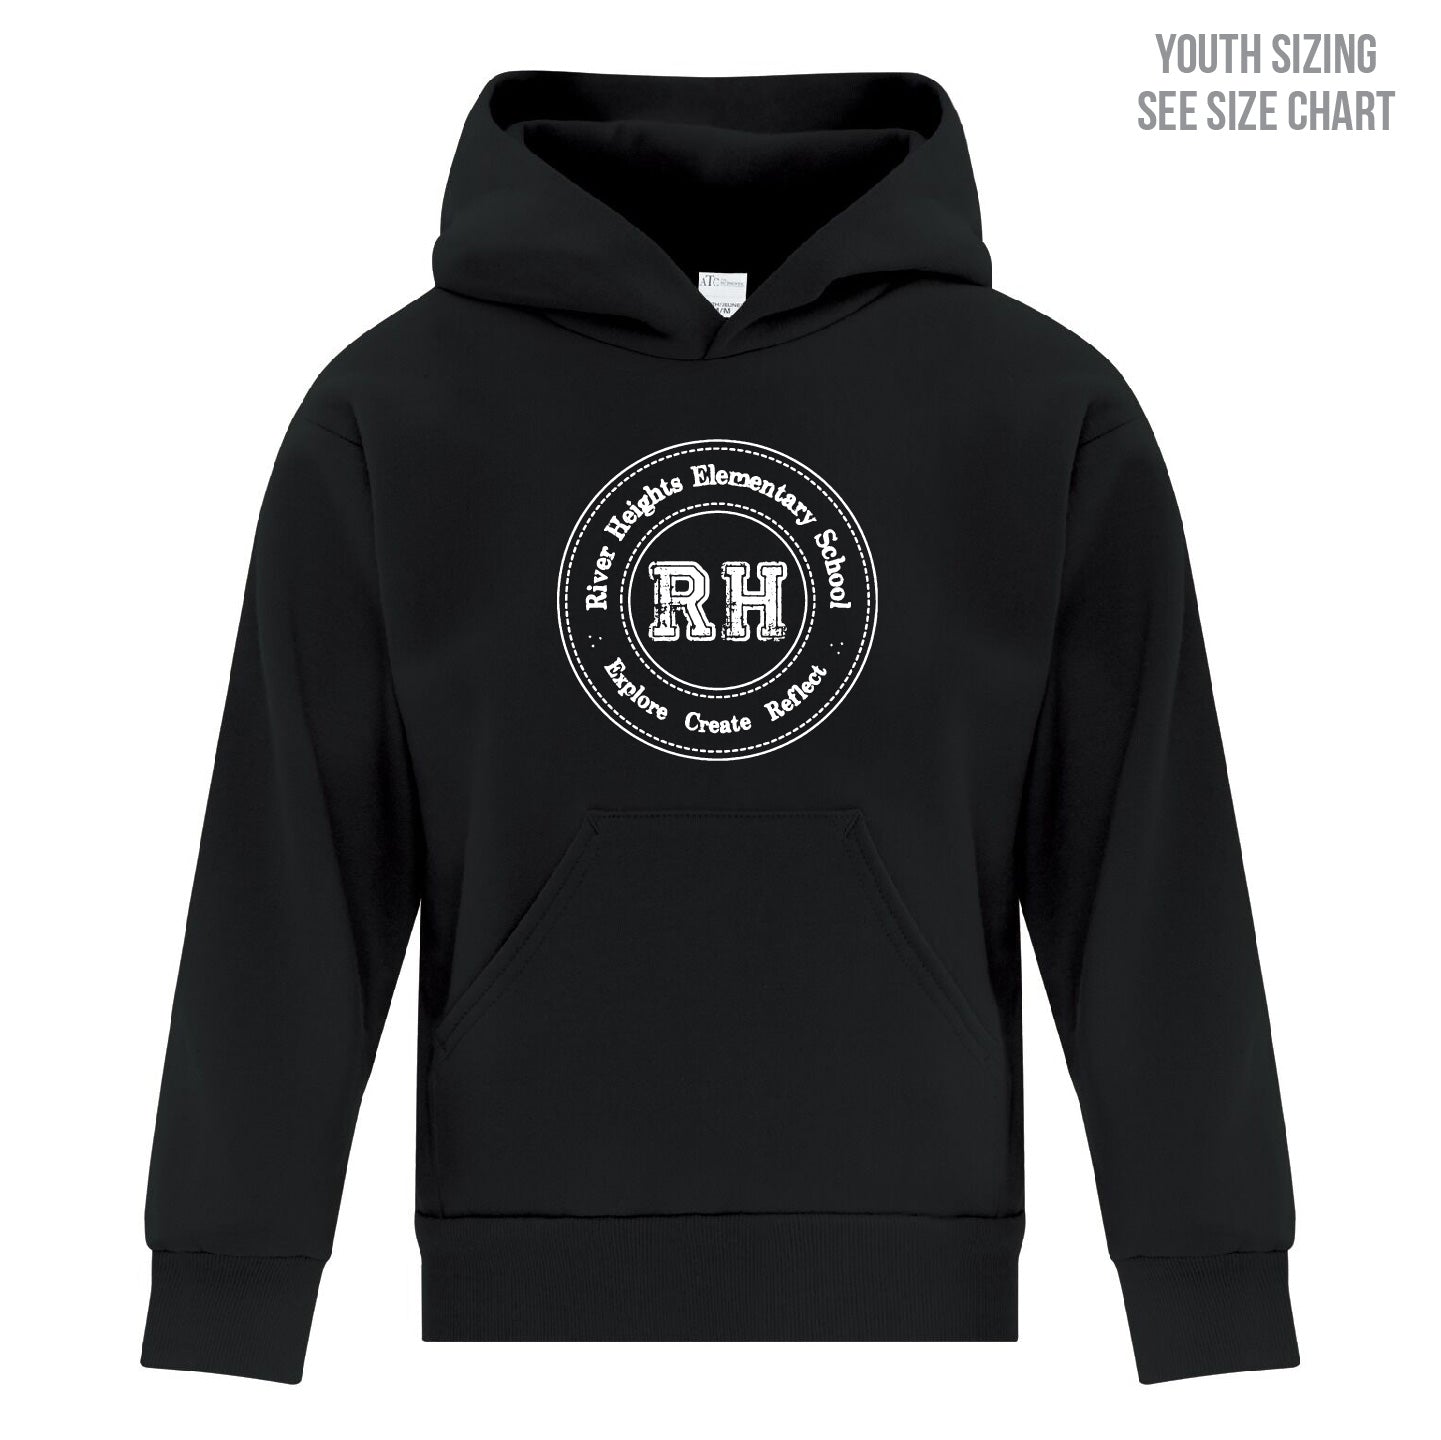 River Heights YOUTH Pullover Hoodie (RHEST003-Y2500)